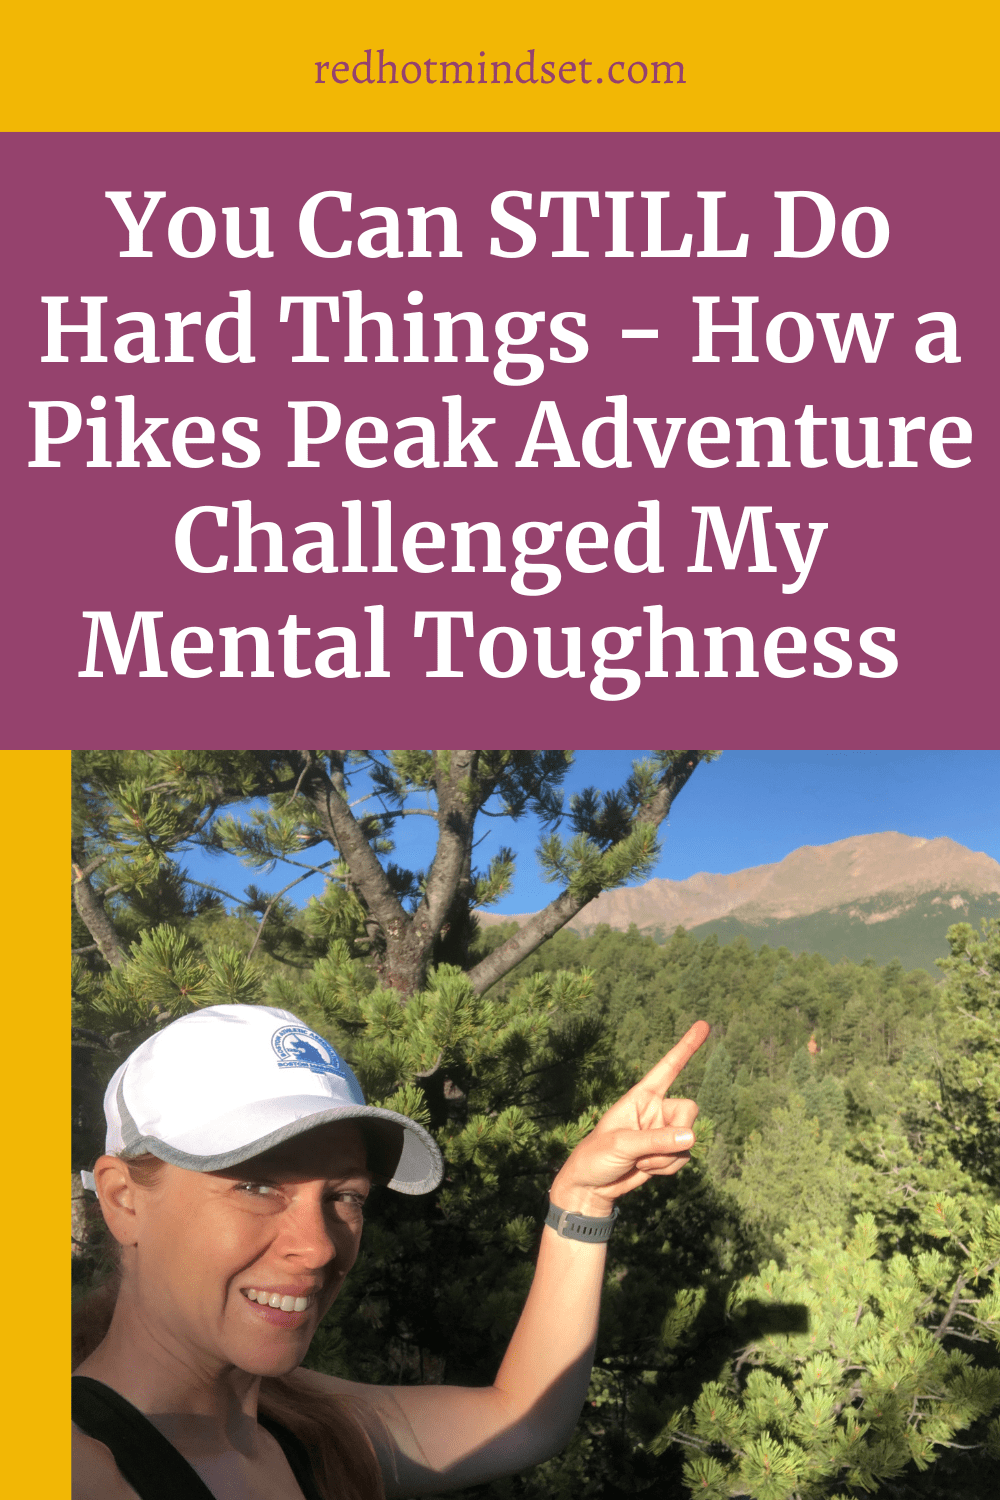 Picture of woman with white hat on out in nature pointing up at Pikes Peak, a mountain over 14,000 feet of elevation. Title reads "You can still do hard things - how a Pikes Peak adventure challenged my mental toughness"